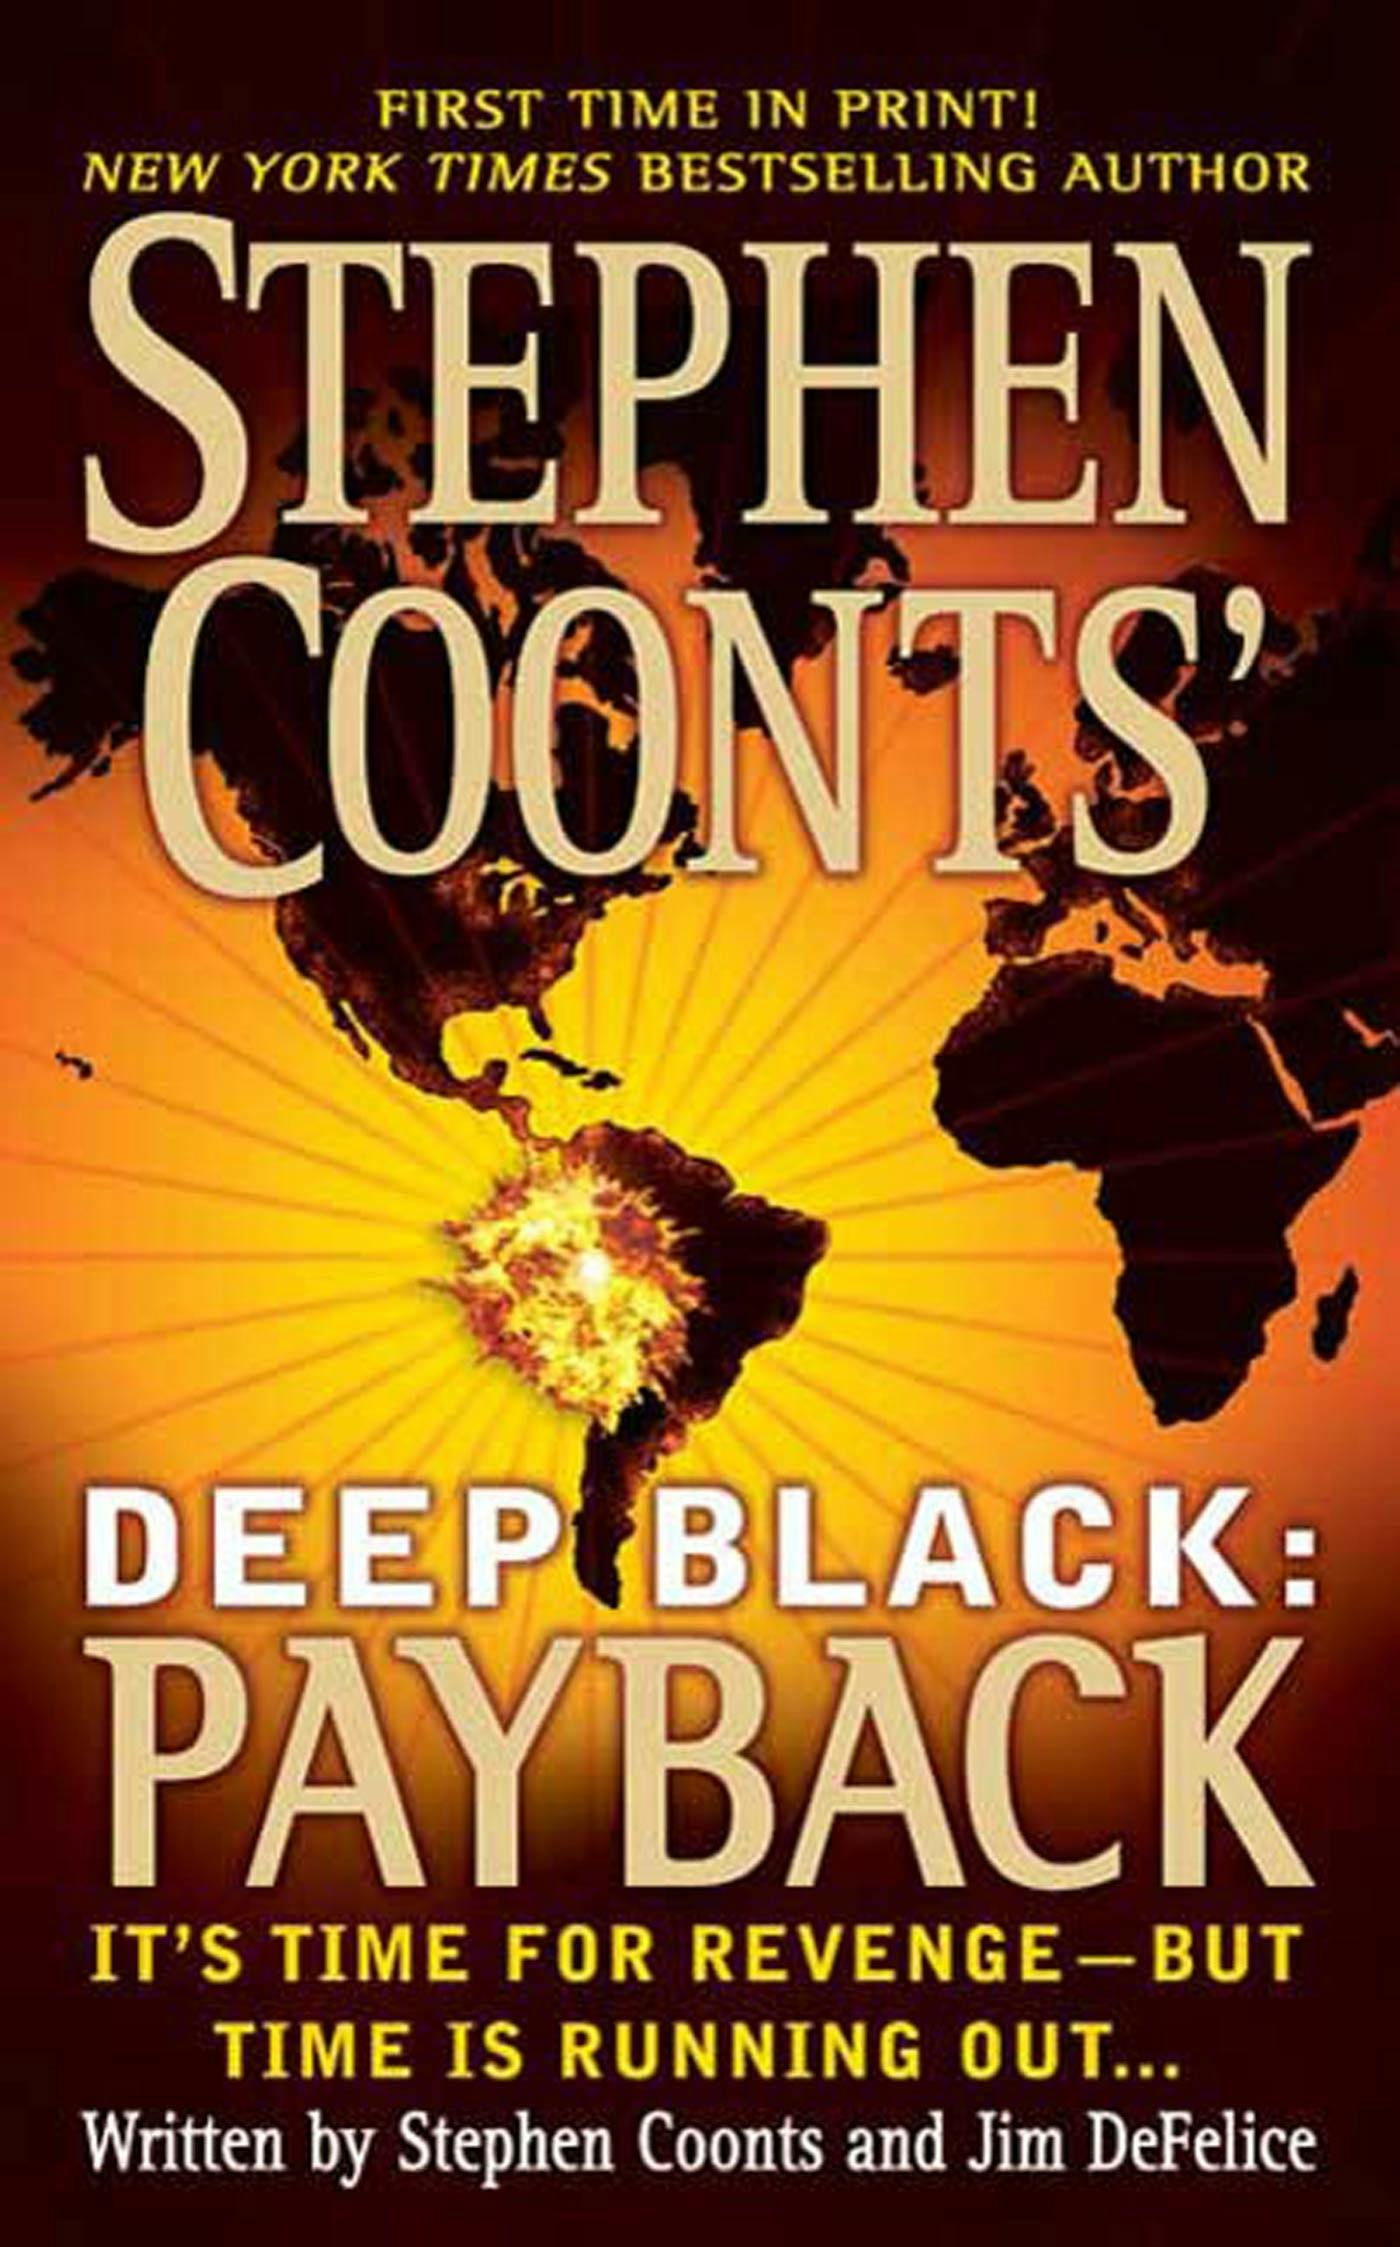 Image of Stephen Coonts' Deep Black: Payback